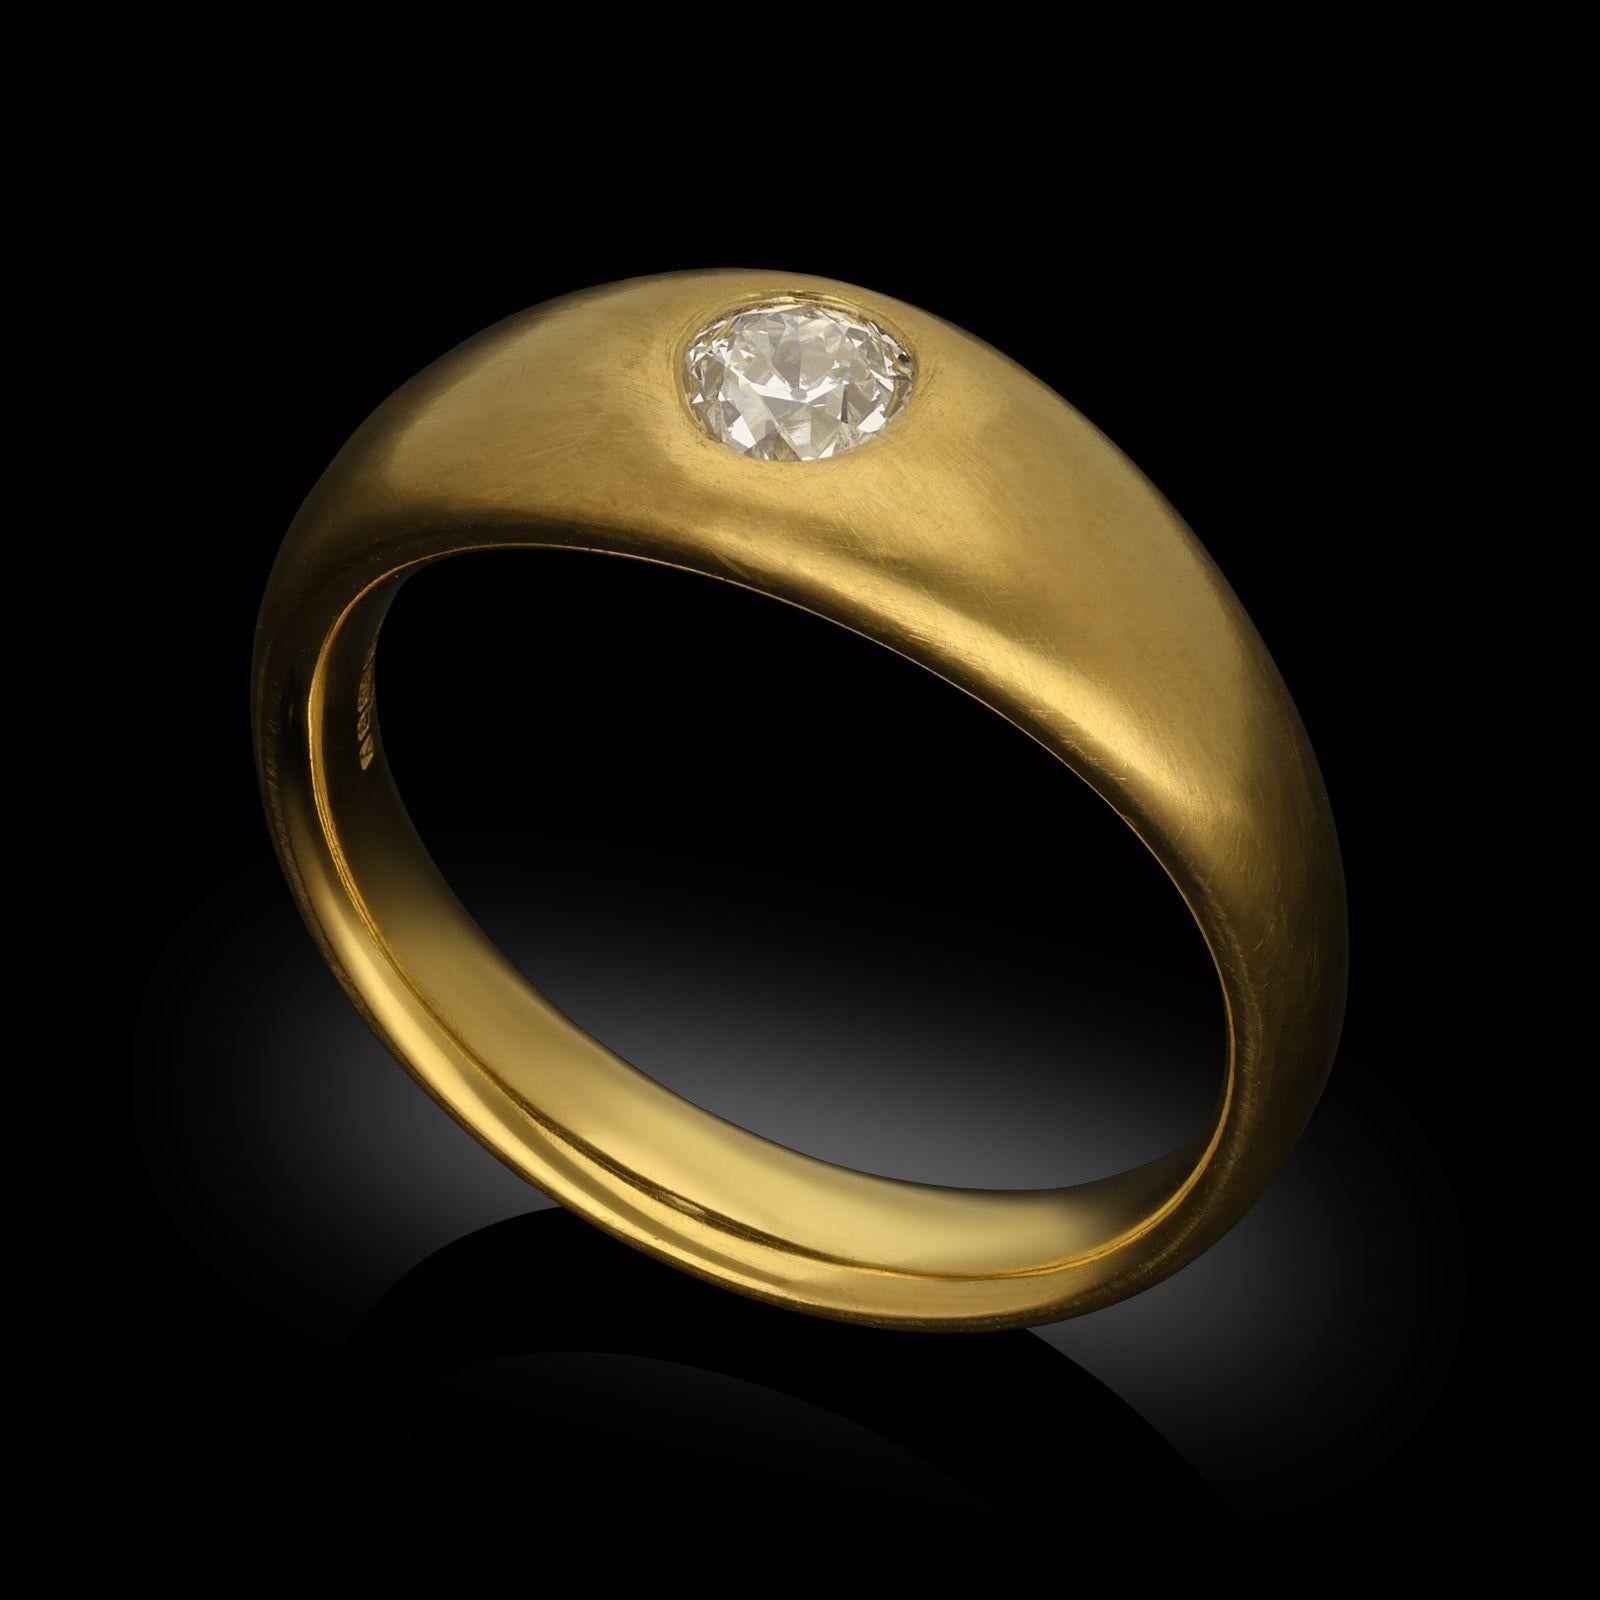 Hancocks Contemporary 0.54ct Old European Cut Diamond And 22ct Gold Band Ring In New Condition For Sale In London, GB